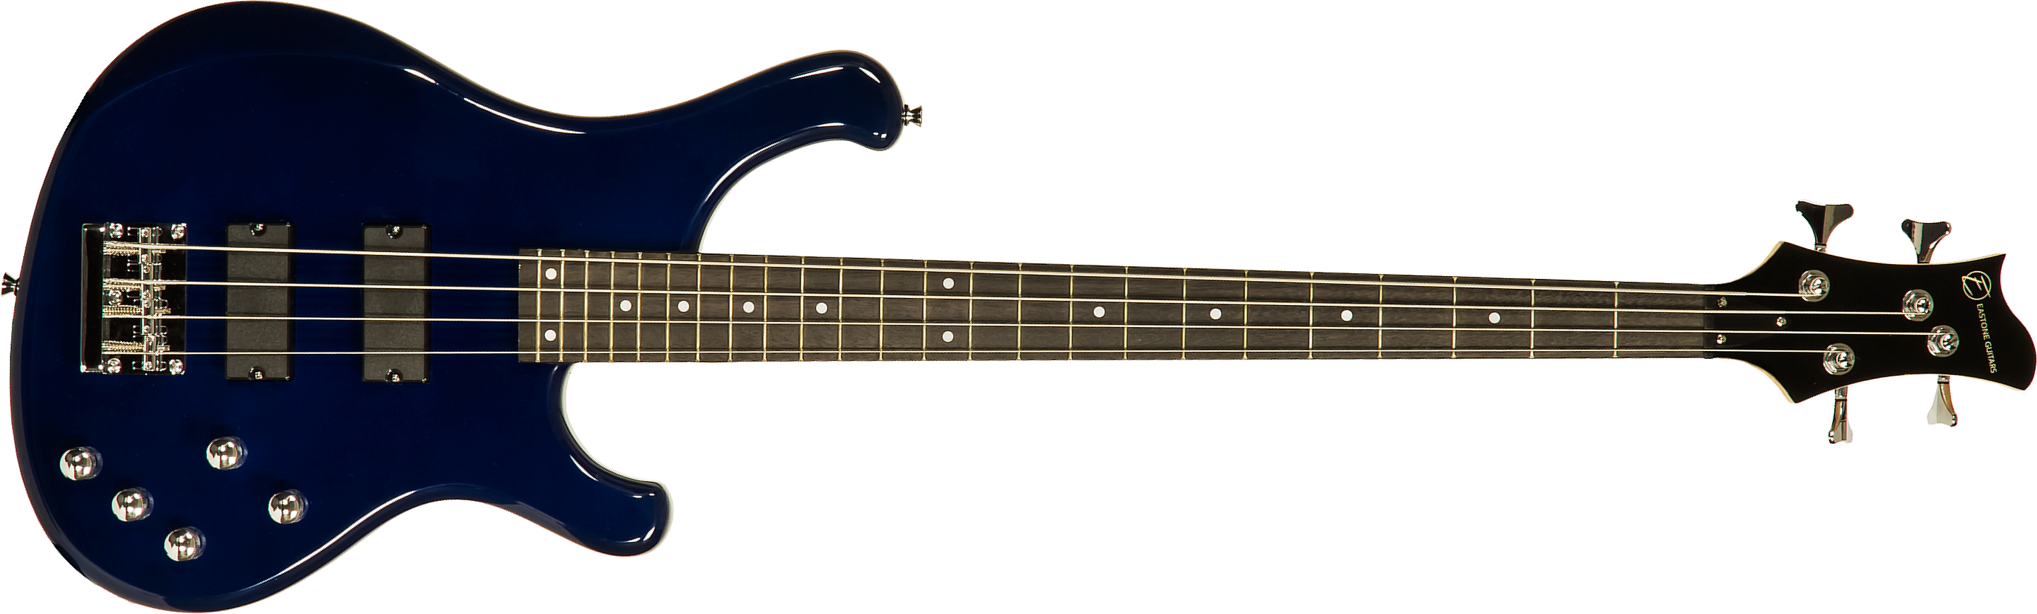 Eastone Rb Active Ama - Blue - Solid body electric bass - Main picture